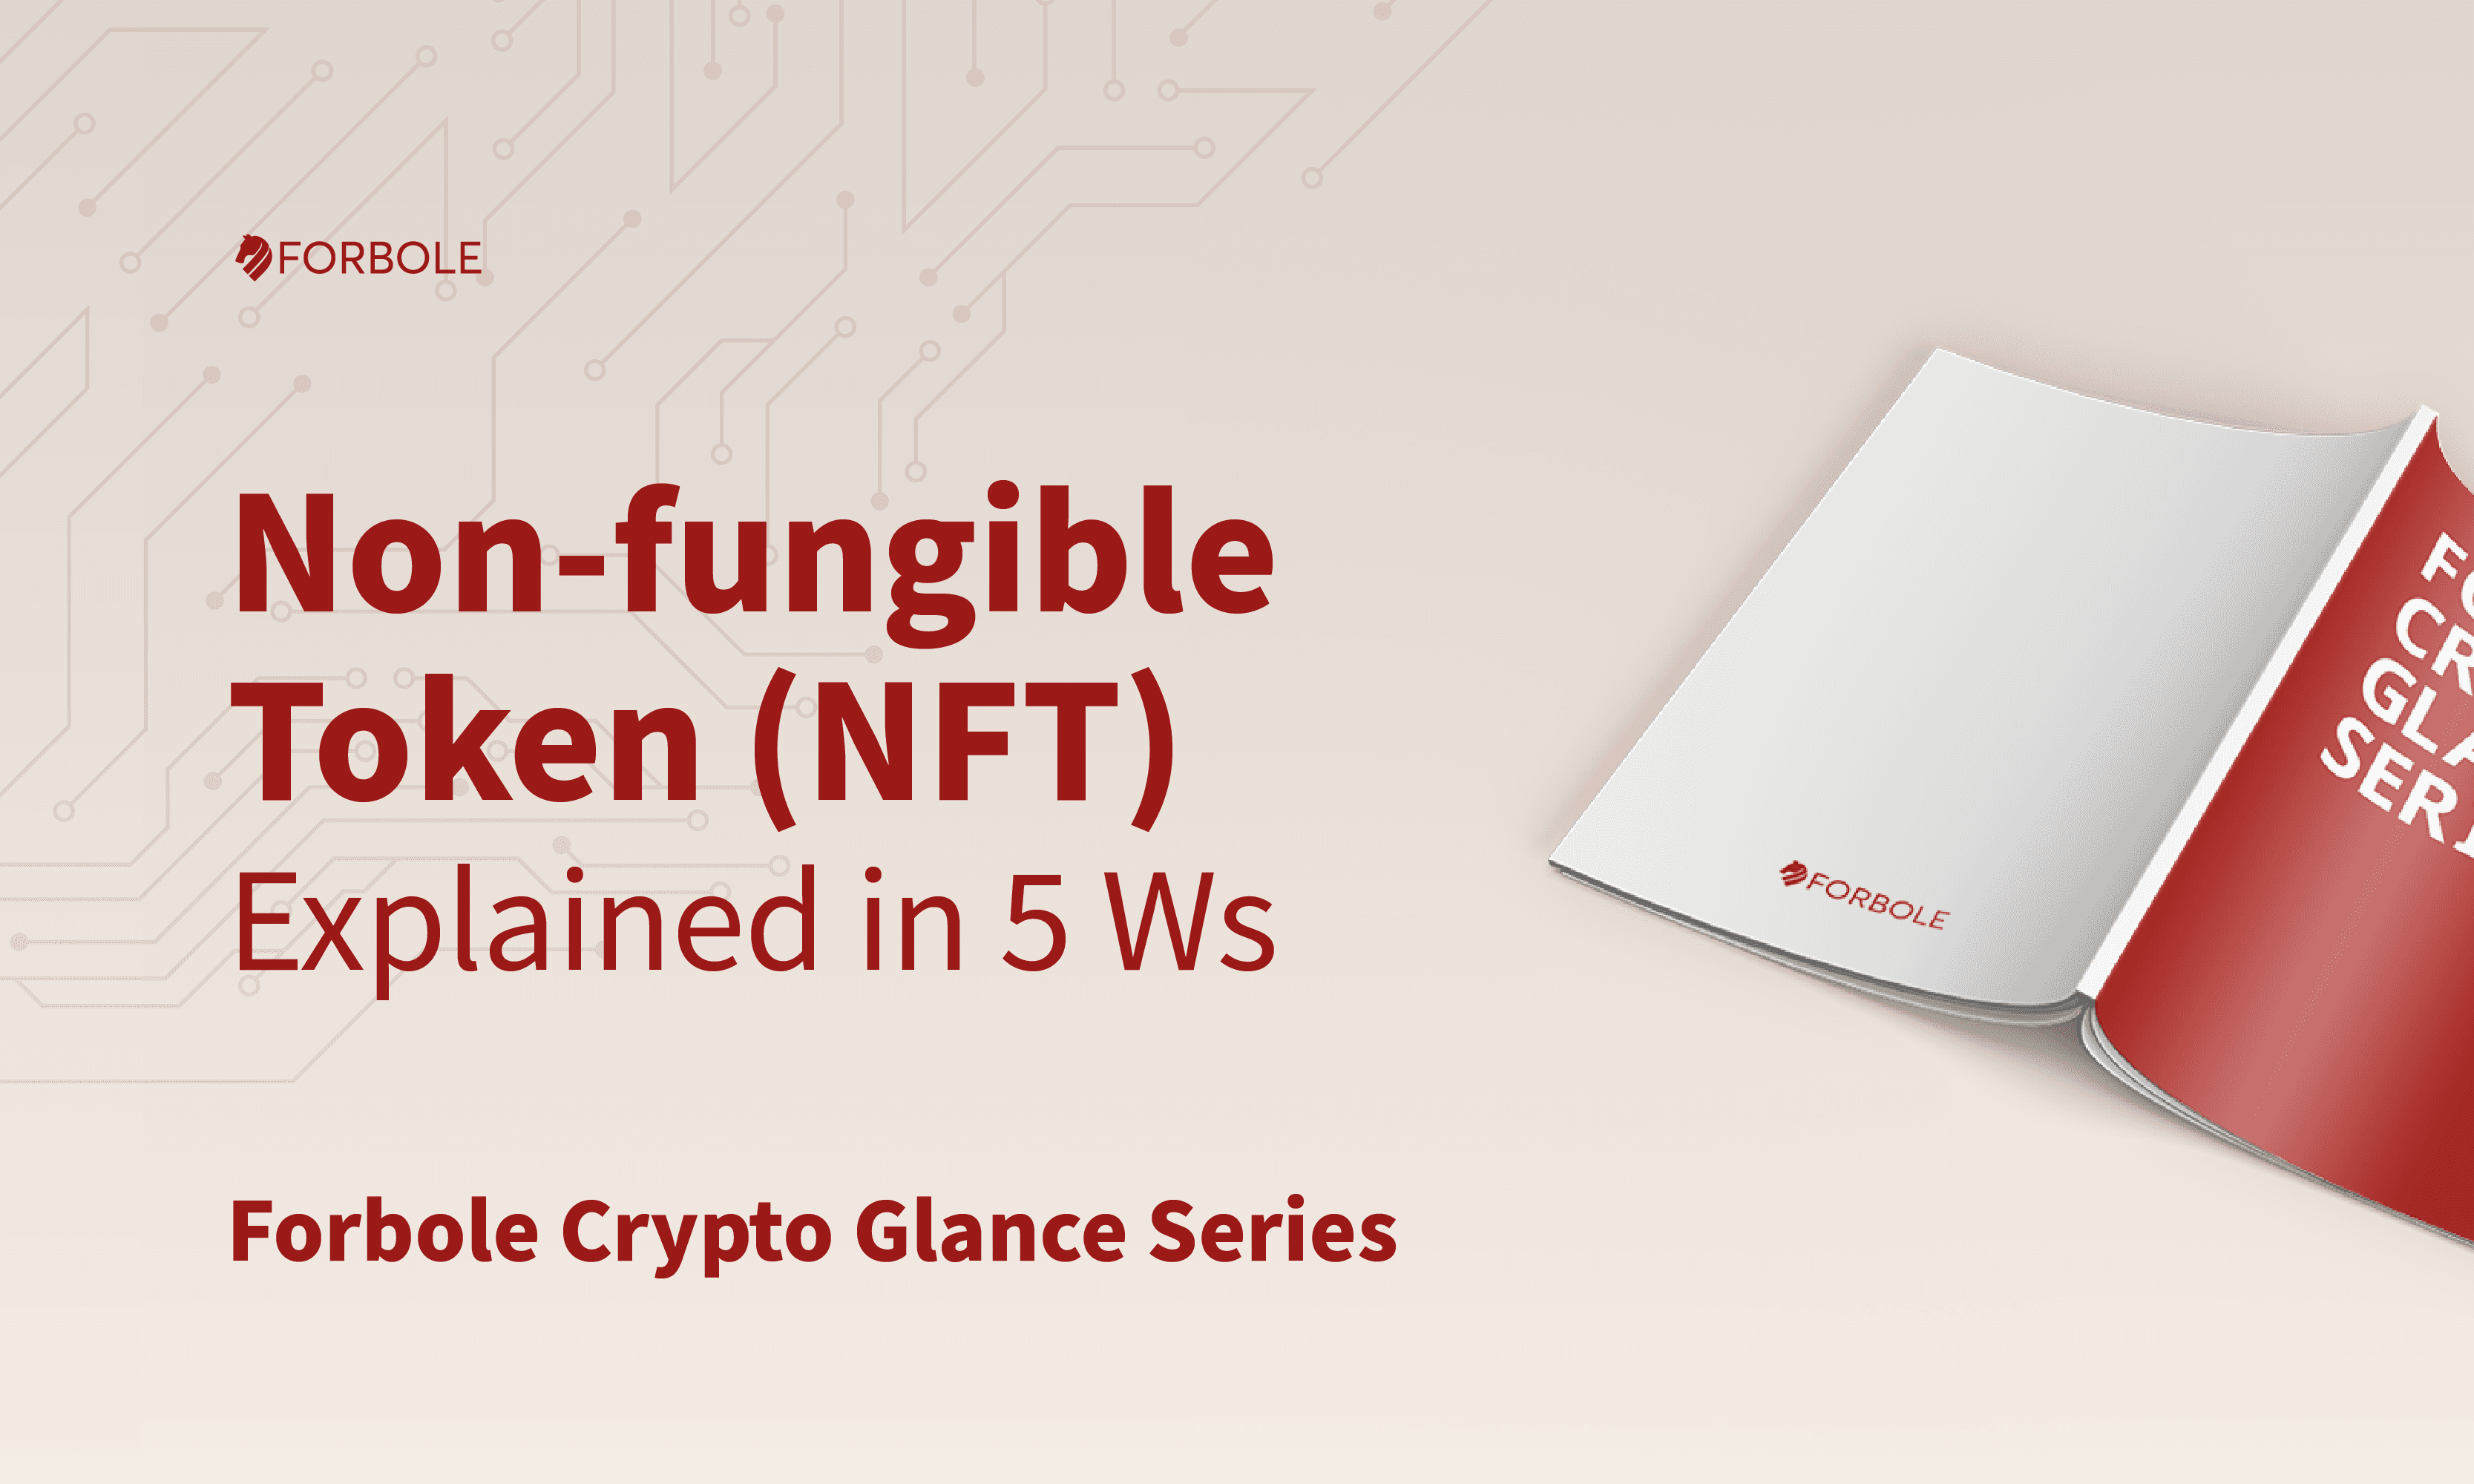 Non-fungible Token (NFT) Explained in 5 Ws